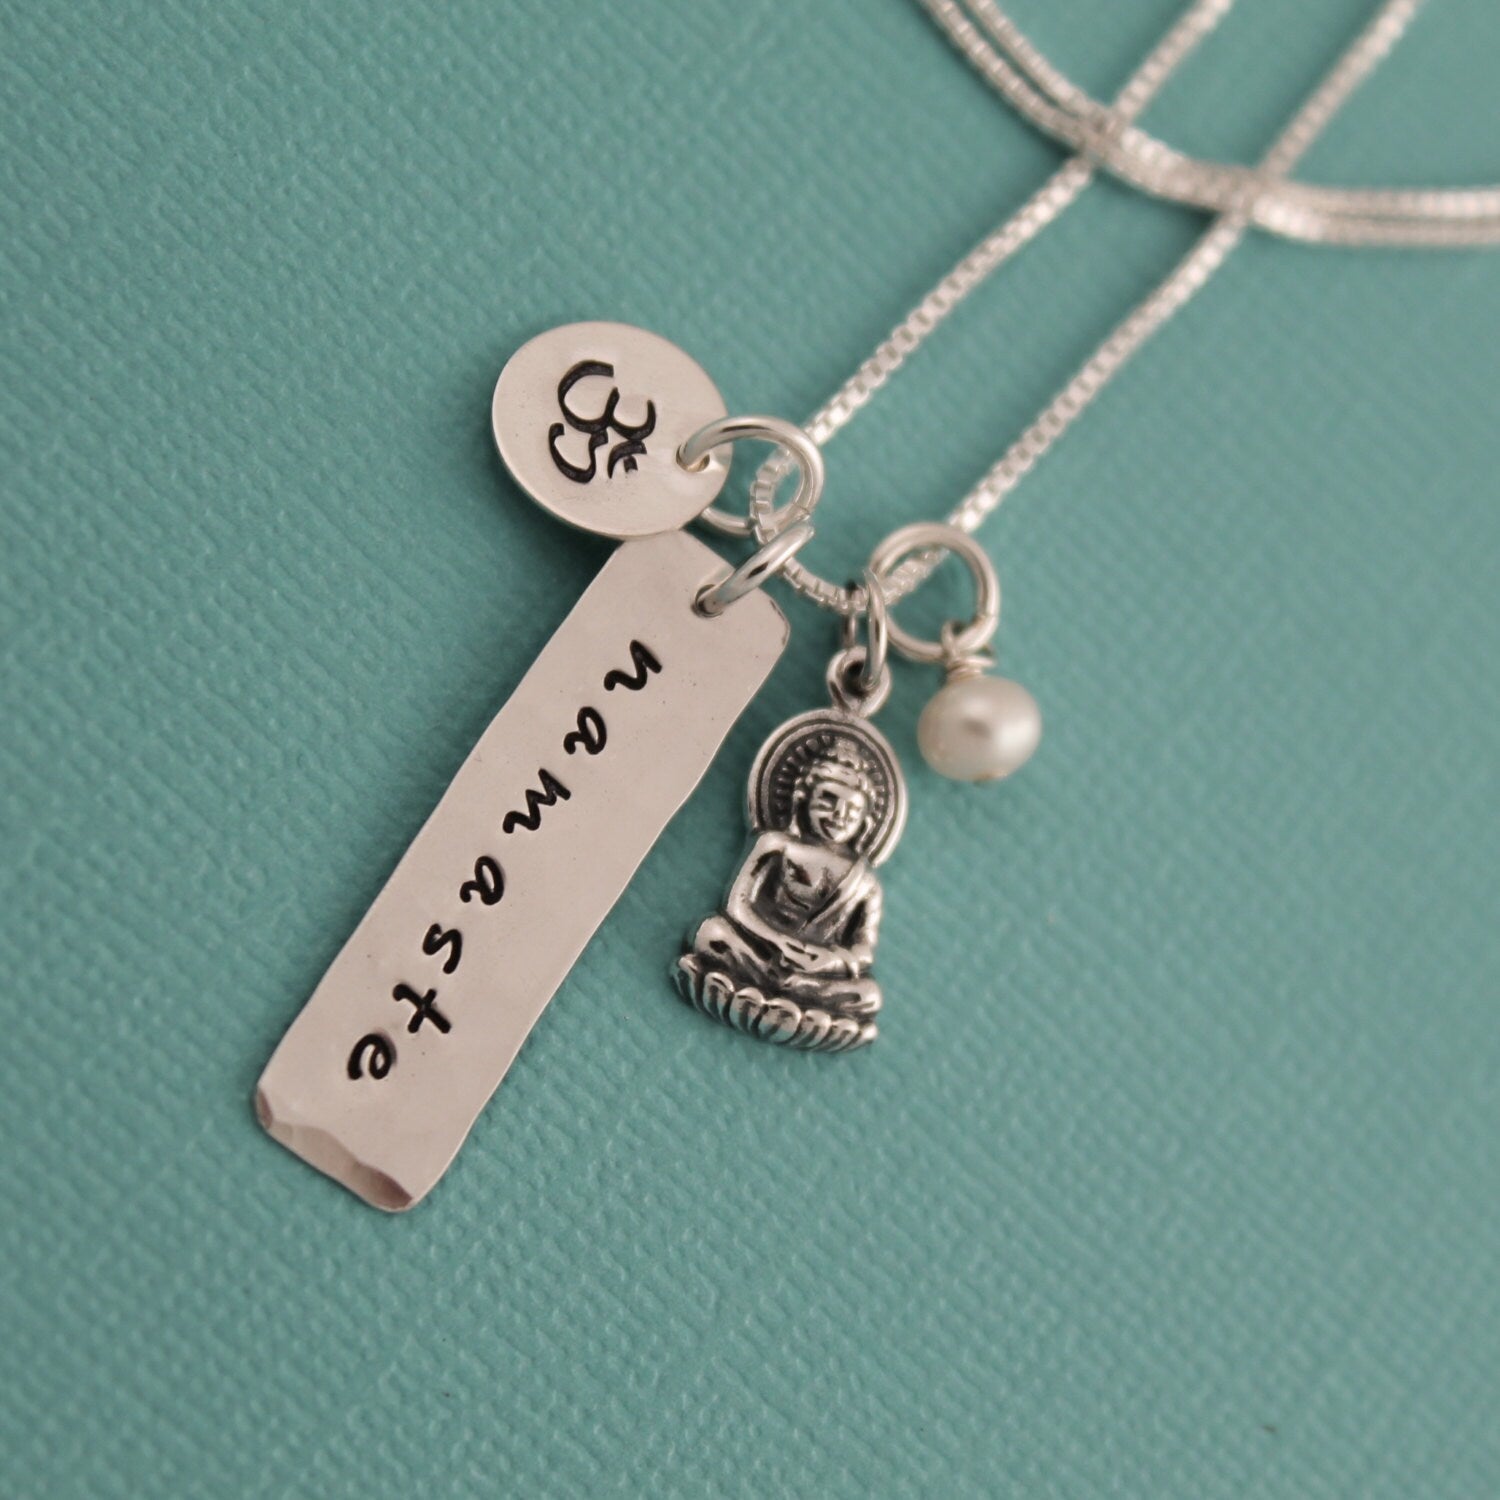 Yoga, Namaste or Breathe  Ohm Buddha Necklace with Pearl in Sterling Silver Hand Stamped Jewelry